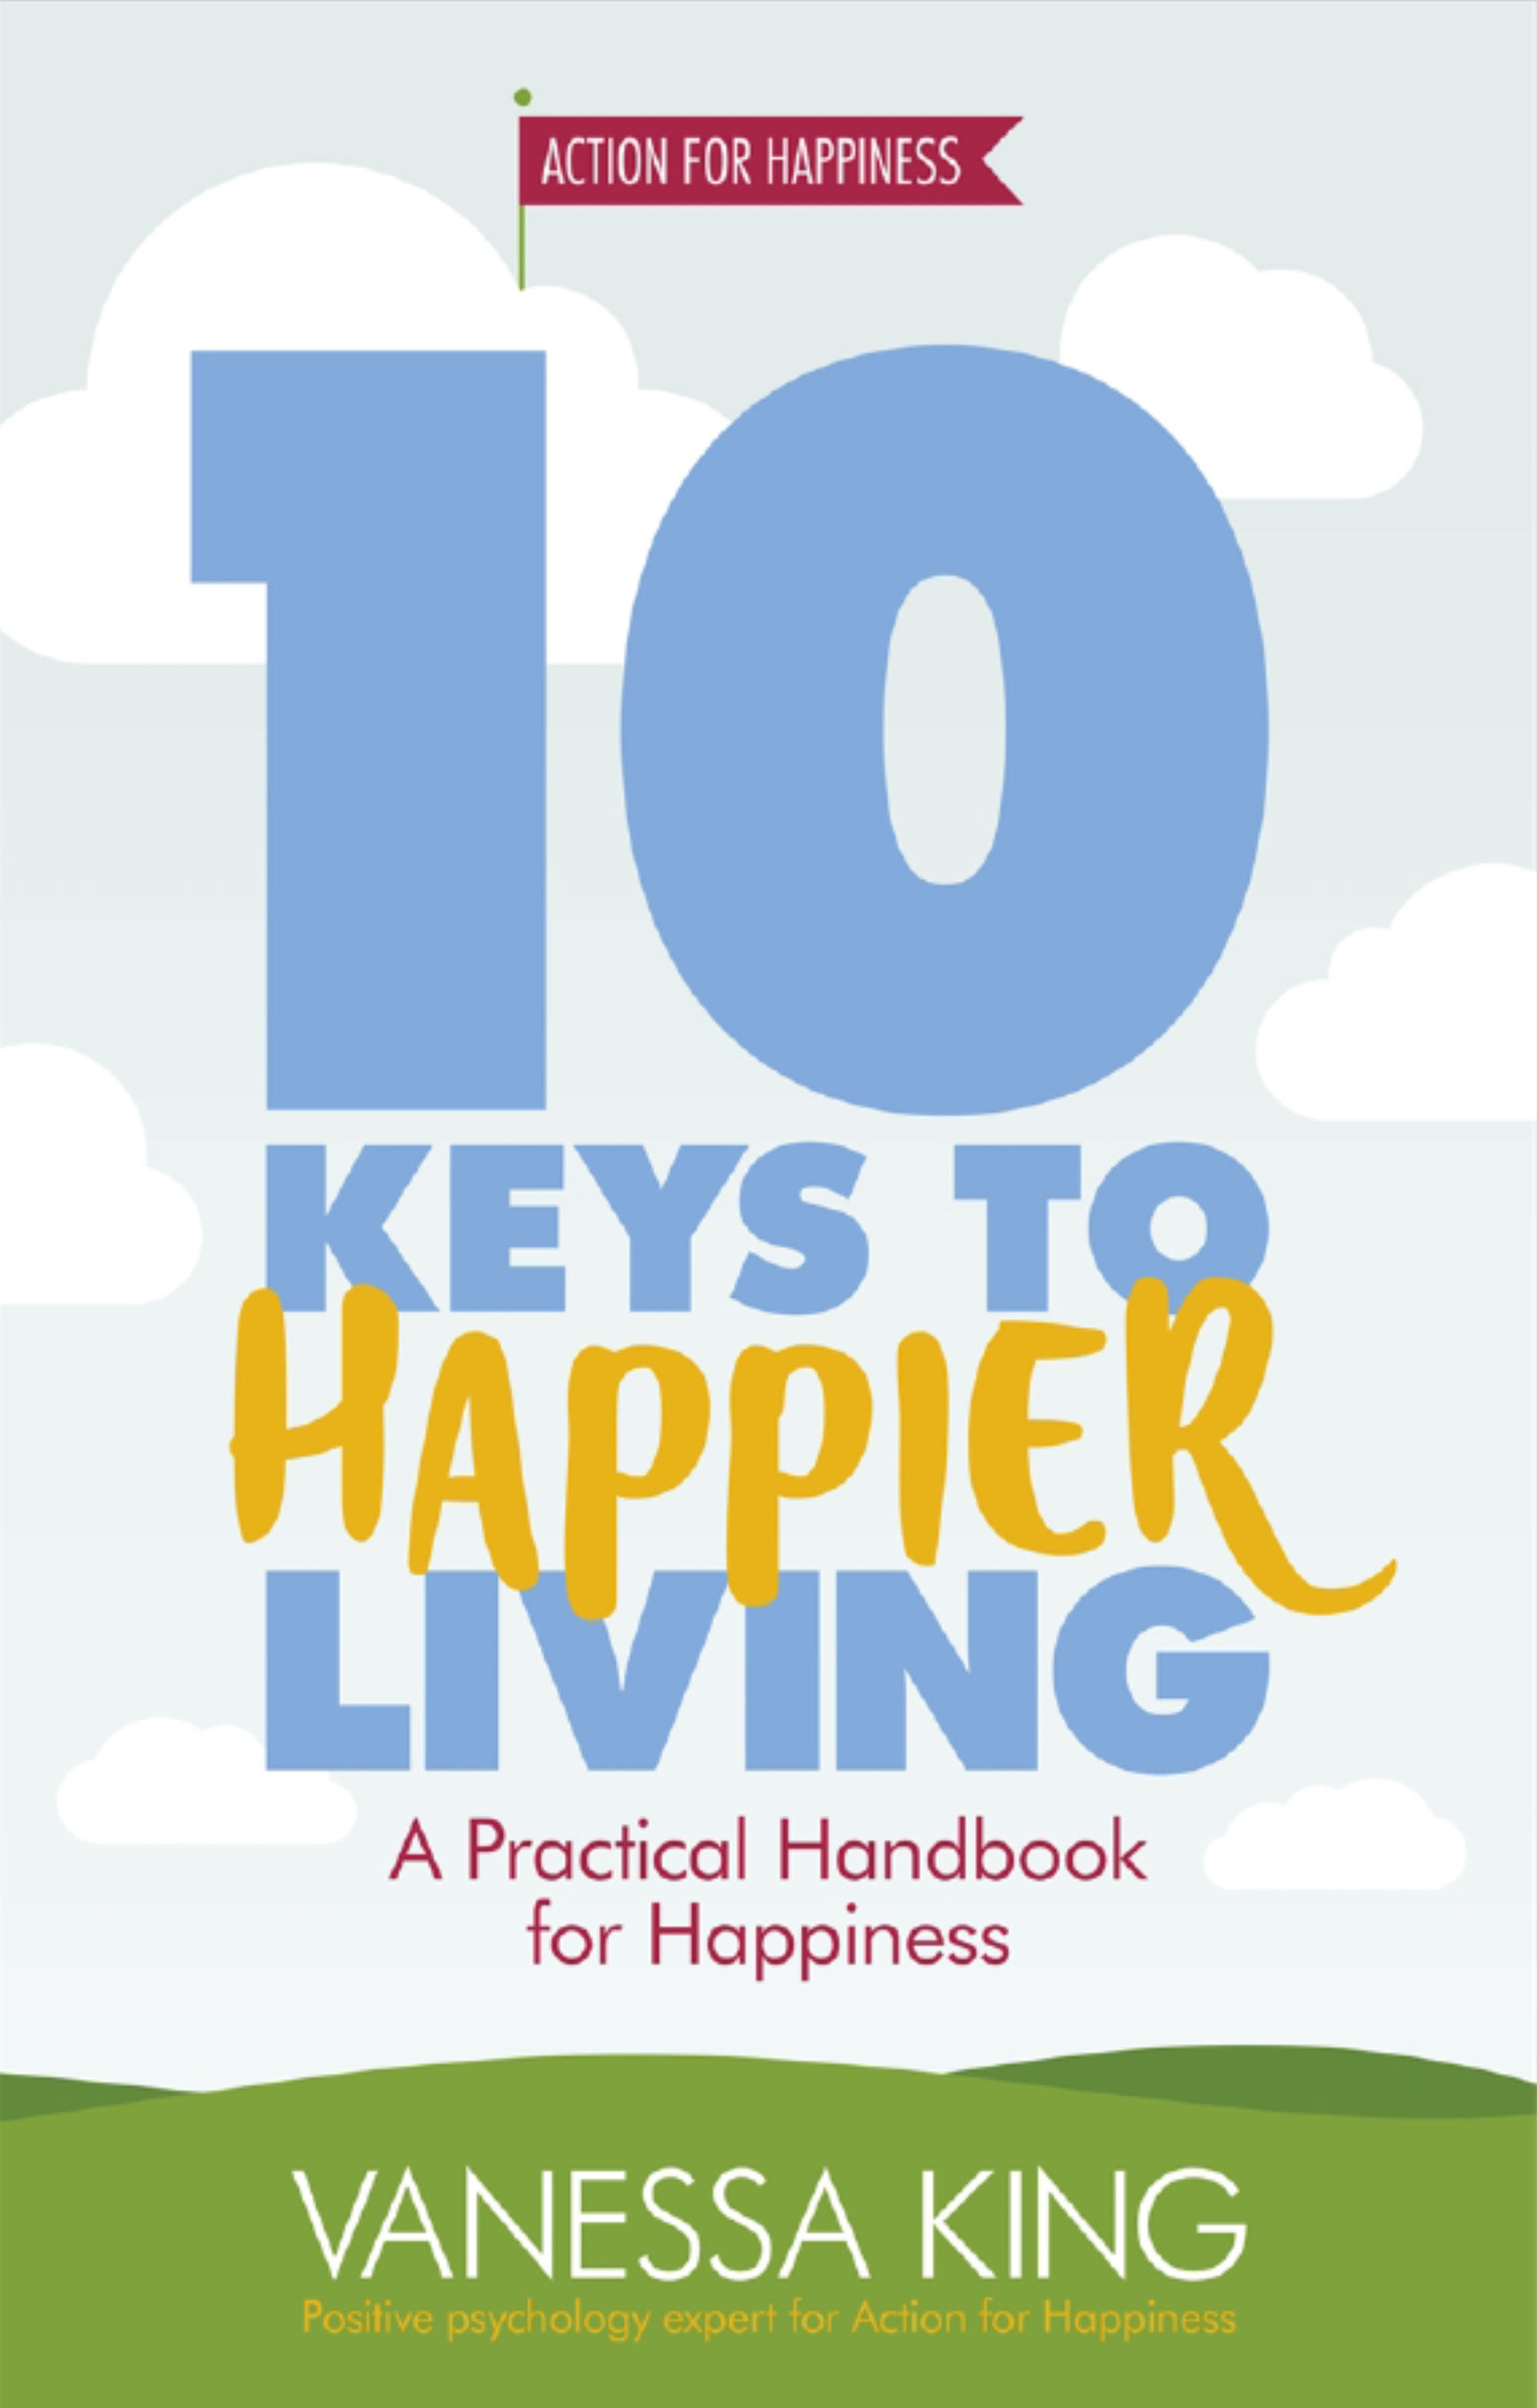 The cover of the 10 Keys to Happier Living Book